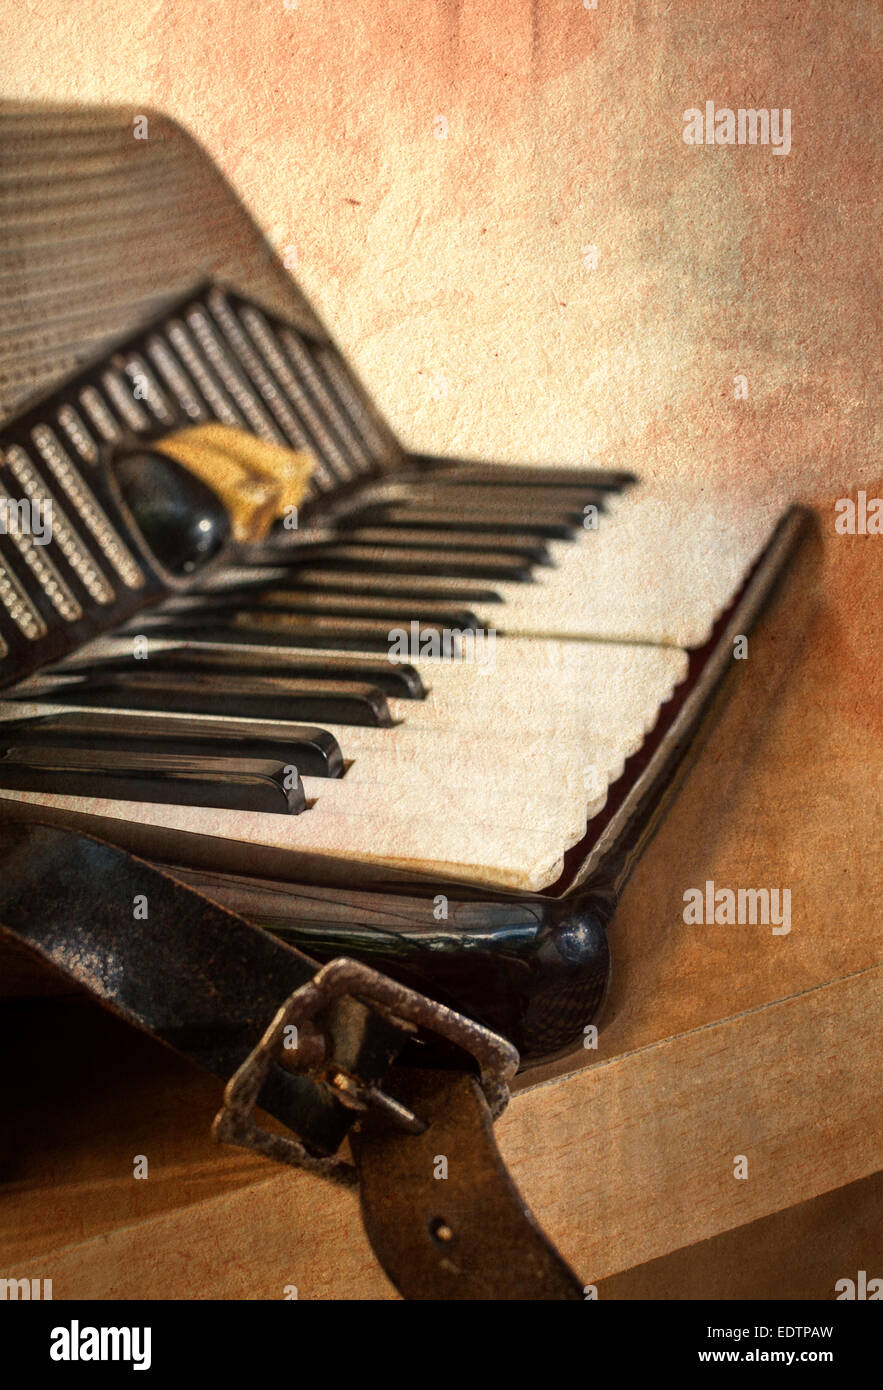 Old accordion instrument in grunge style. Shallow depth of field. Stock Photo